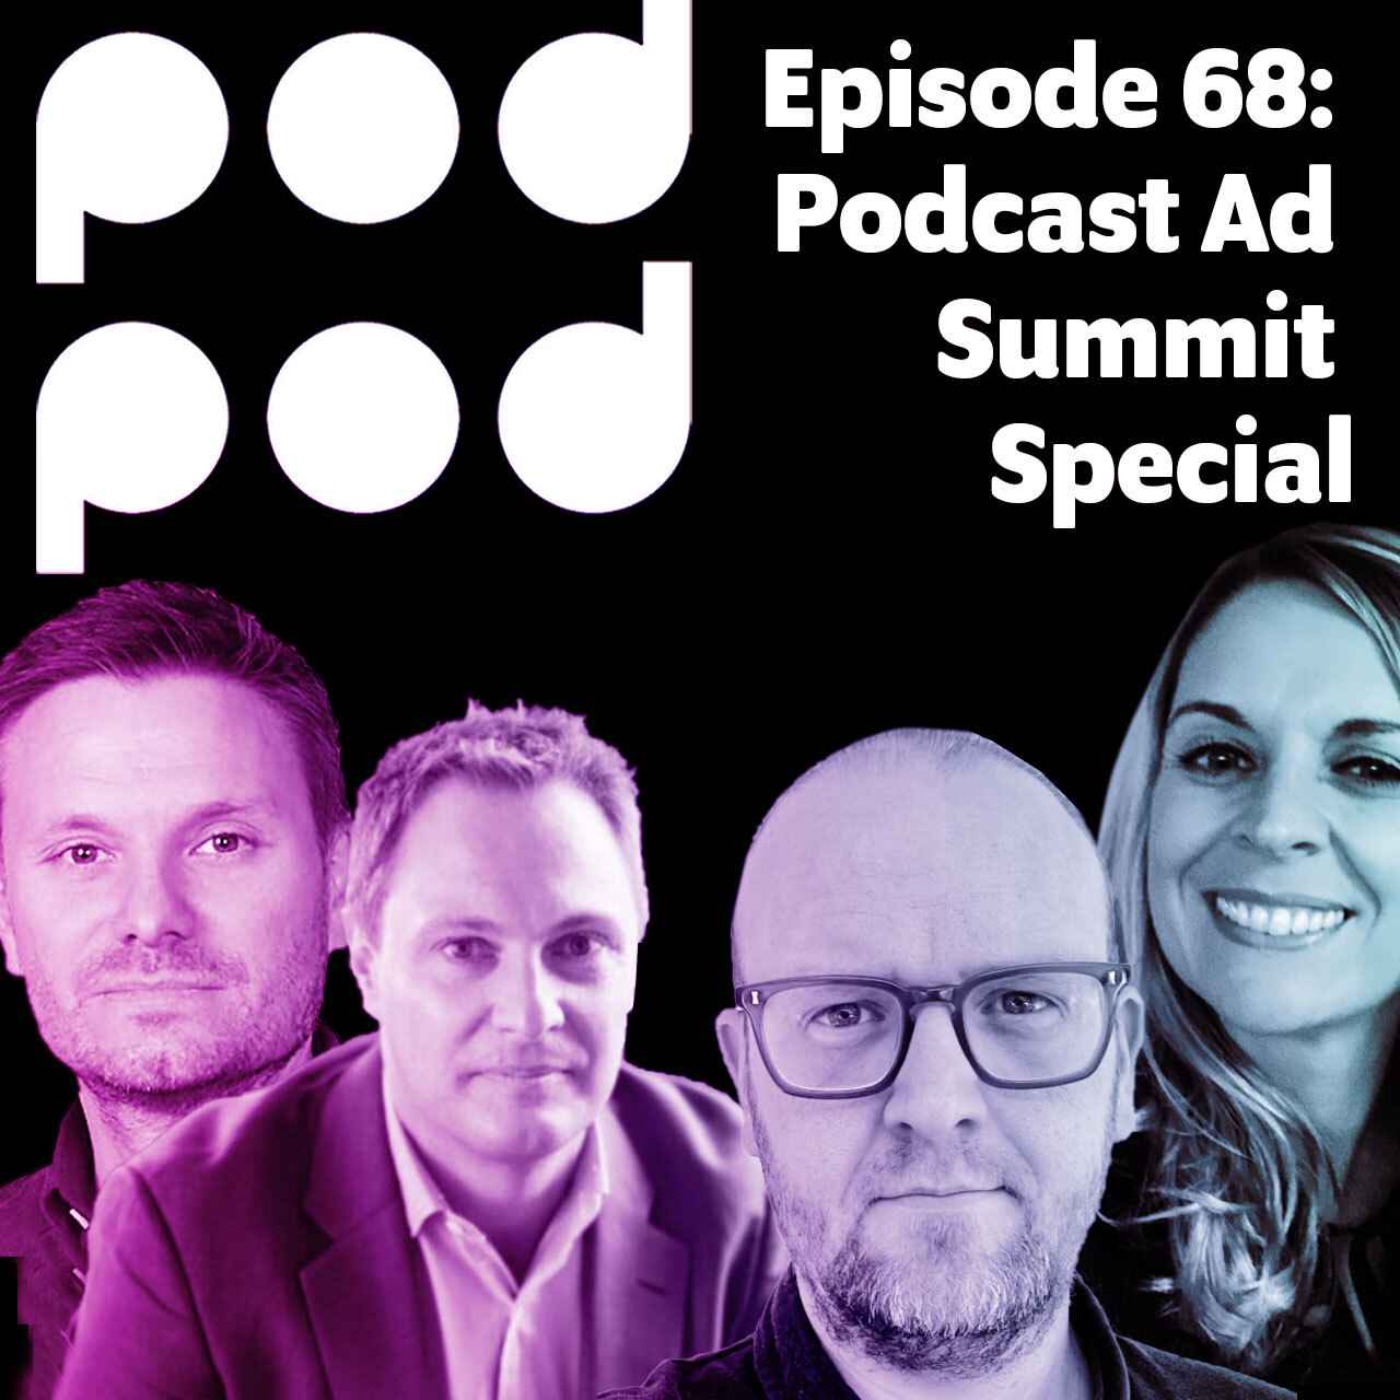 Podcast Advertising Summit: Crafting a killer campaign